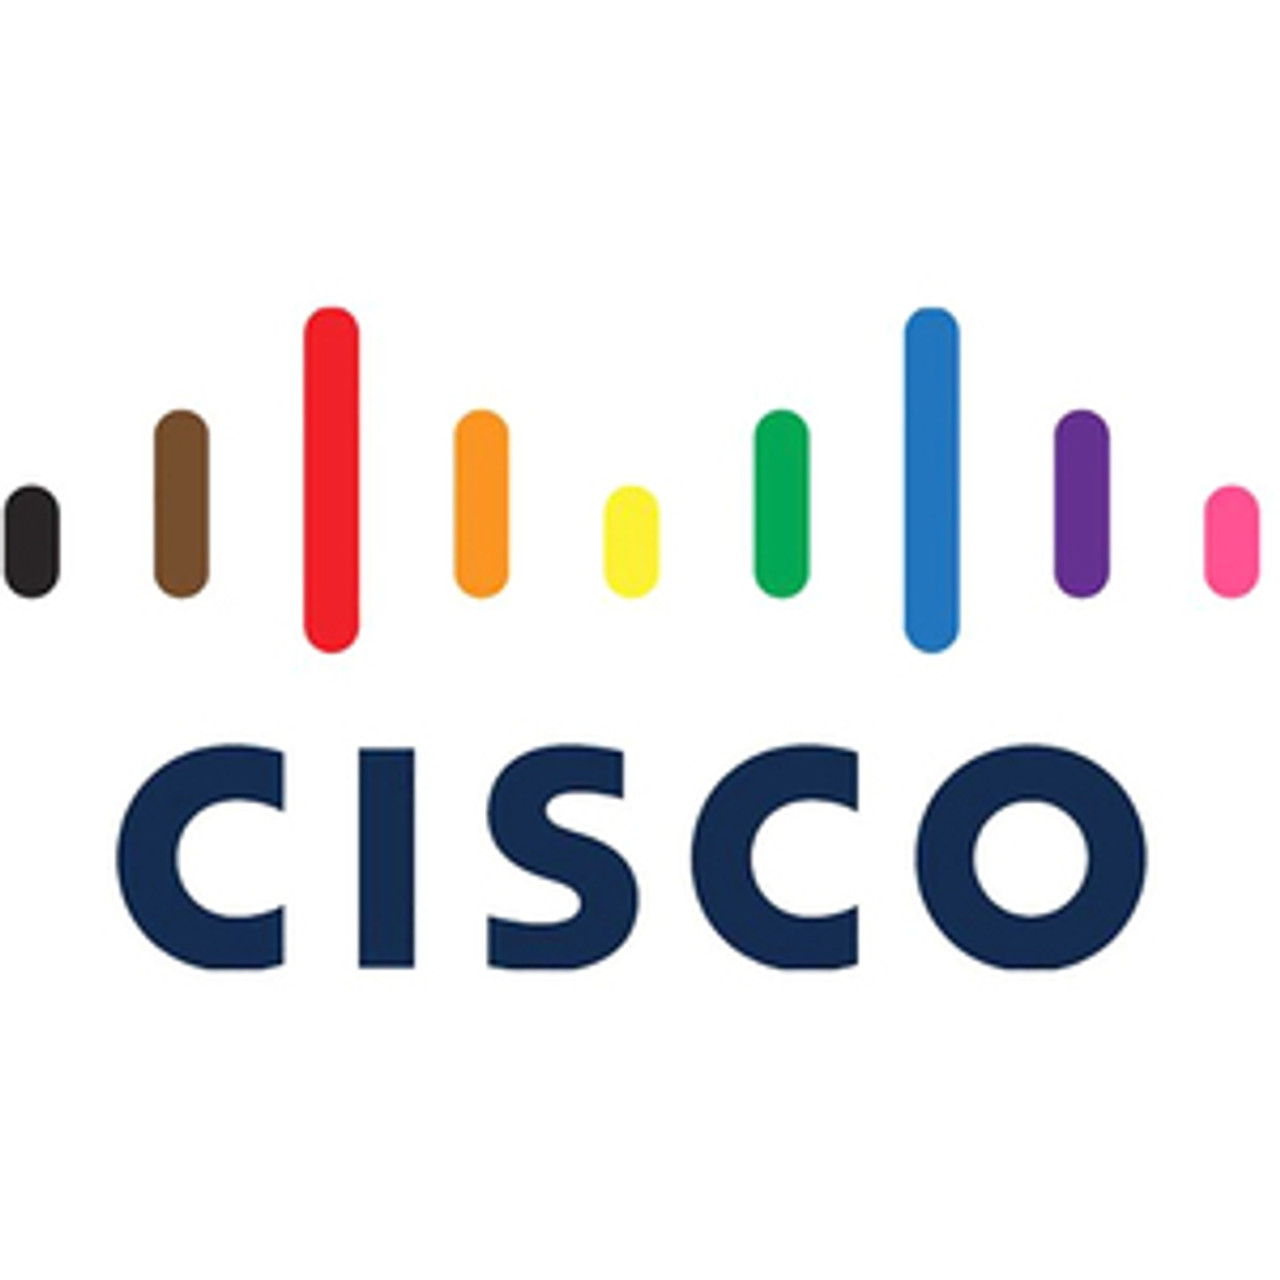 Cisco ASA with FirePOWER Services Advanced Malware Protection - License - 1 License - ASA5515-AMP-SMS-1